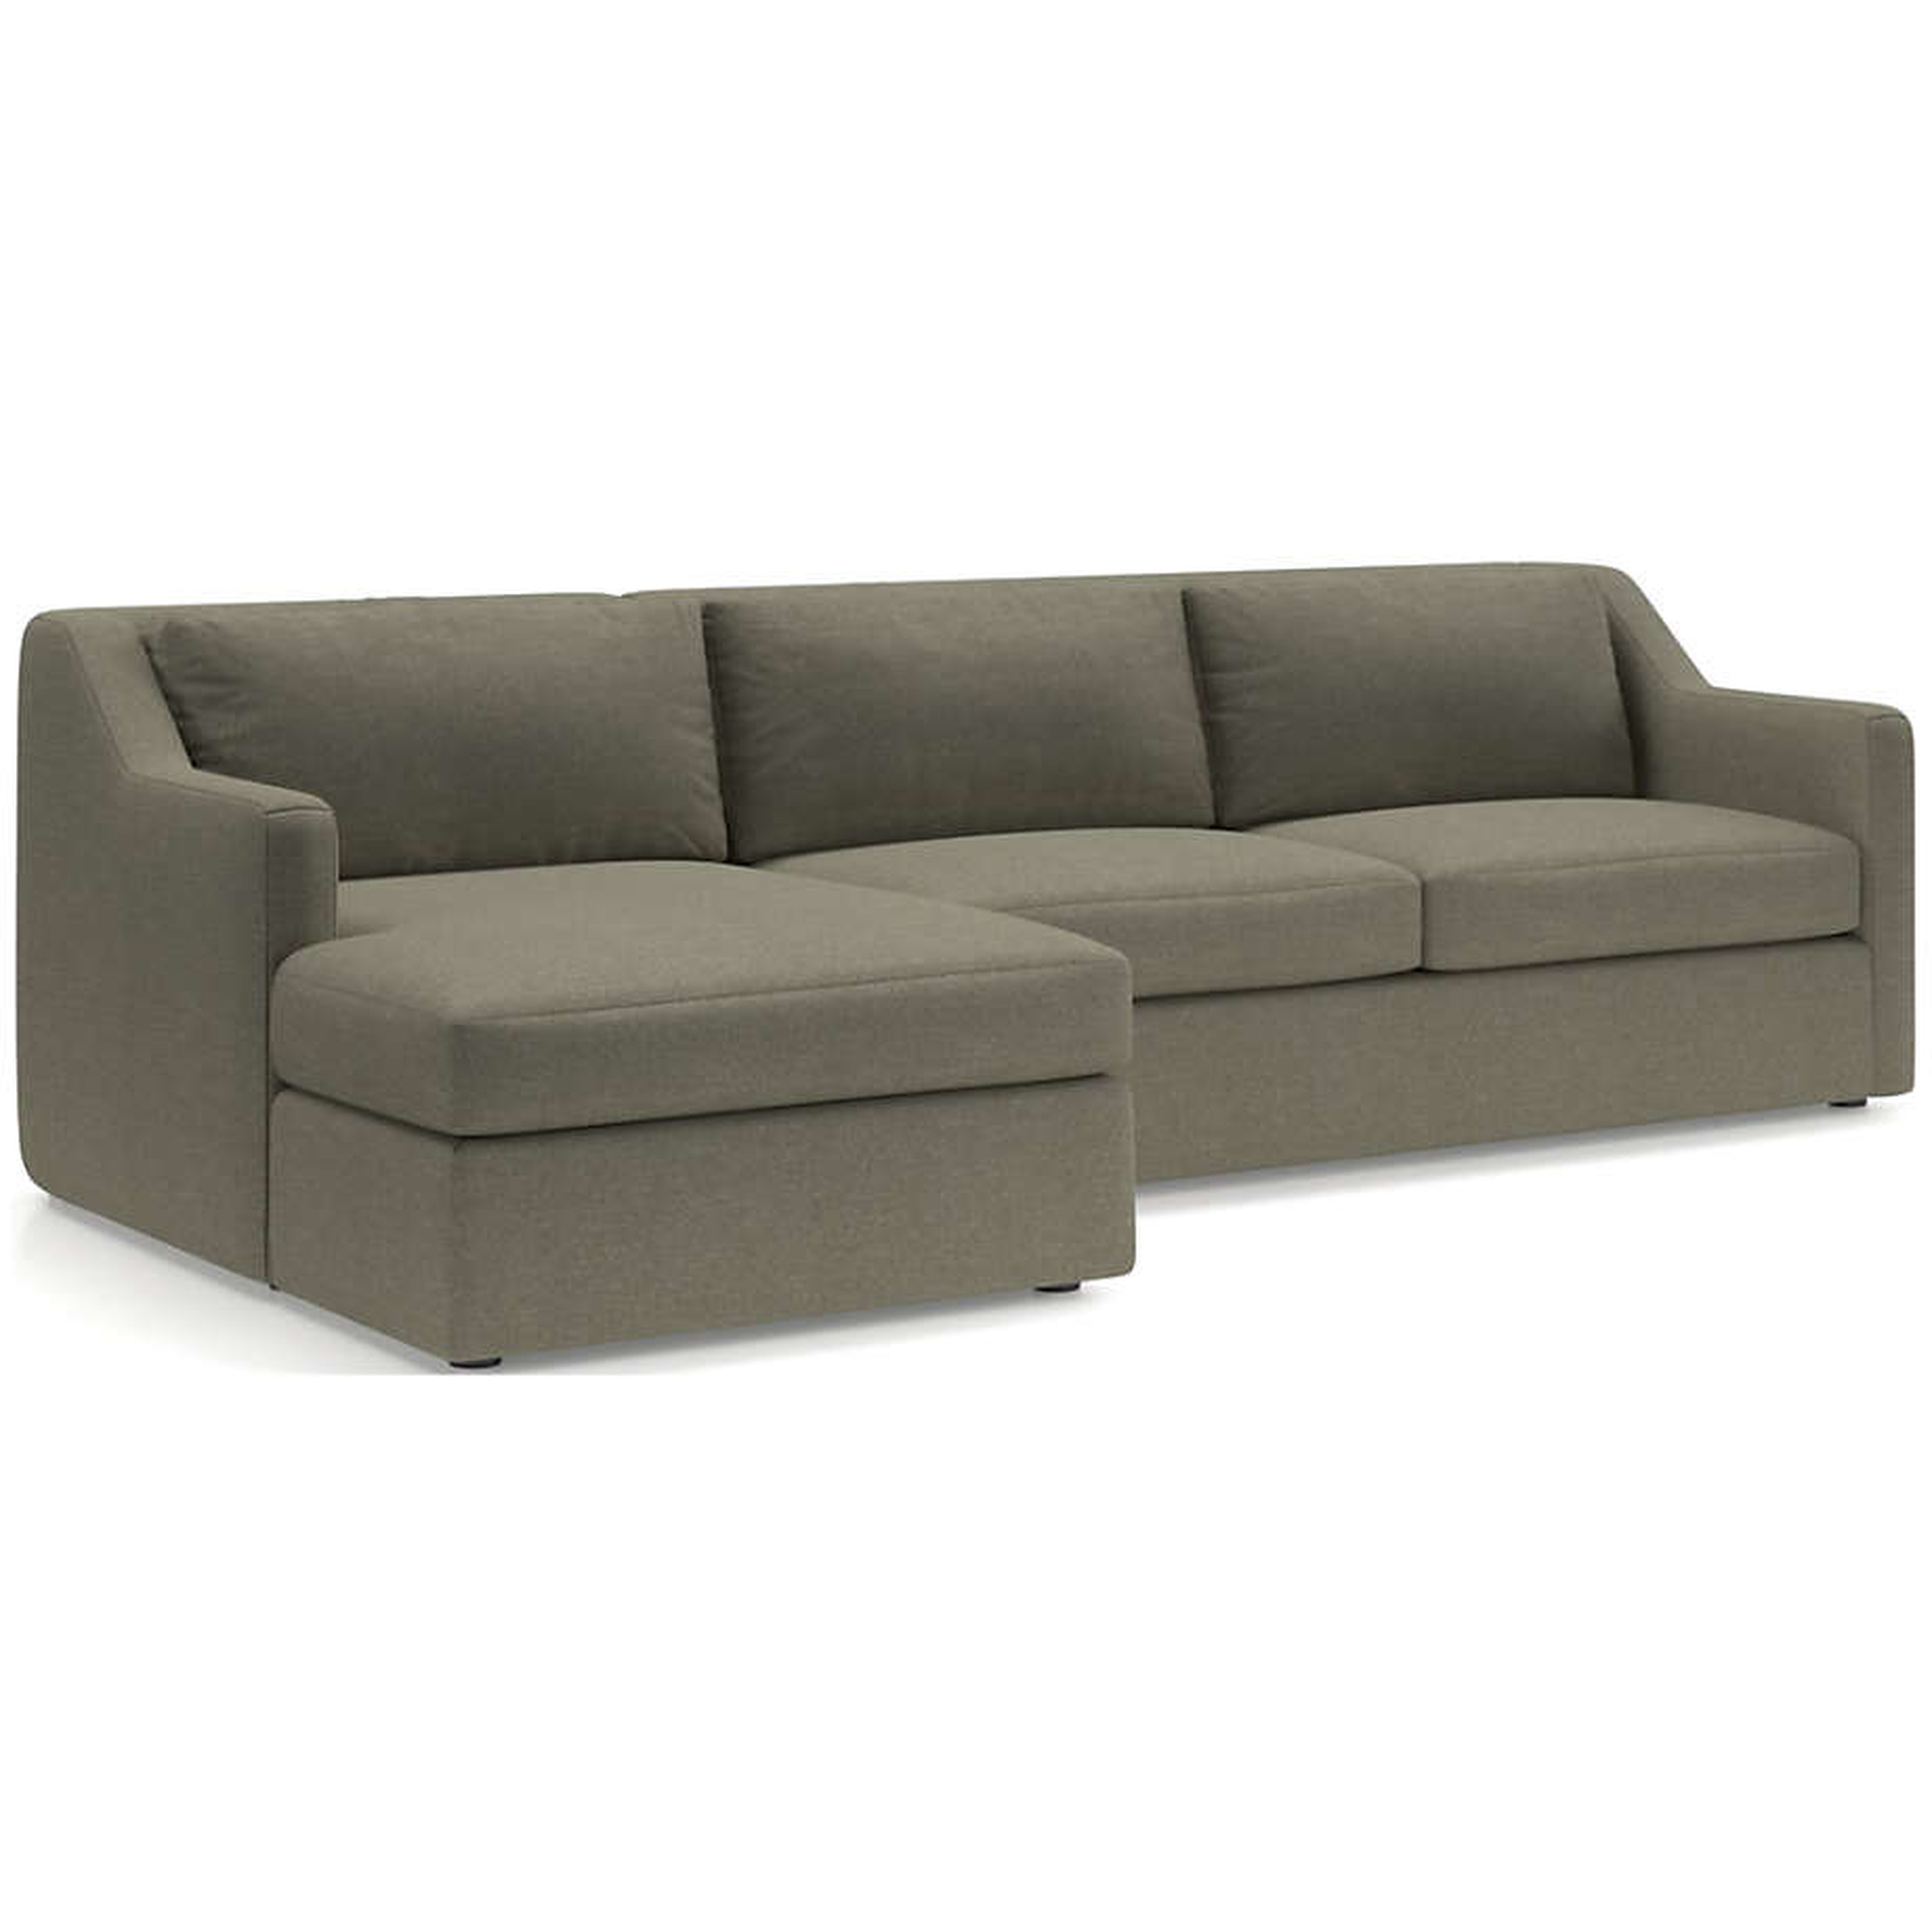 Notch 2-Piece Sectional - Crate and Barrel